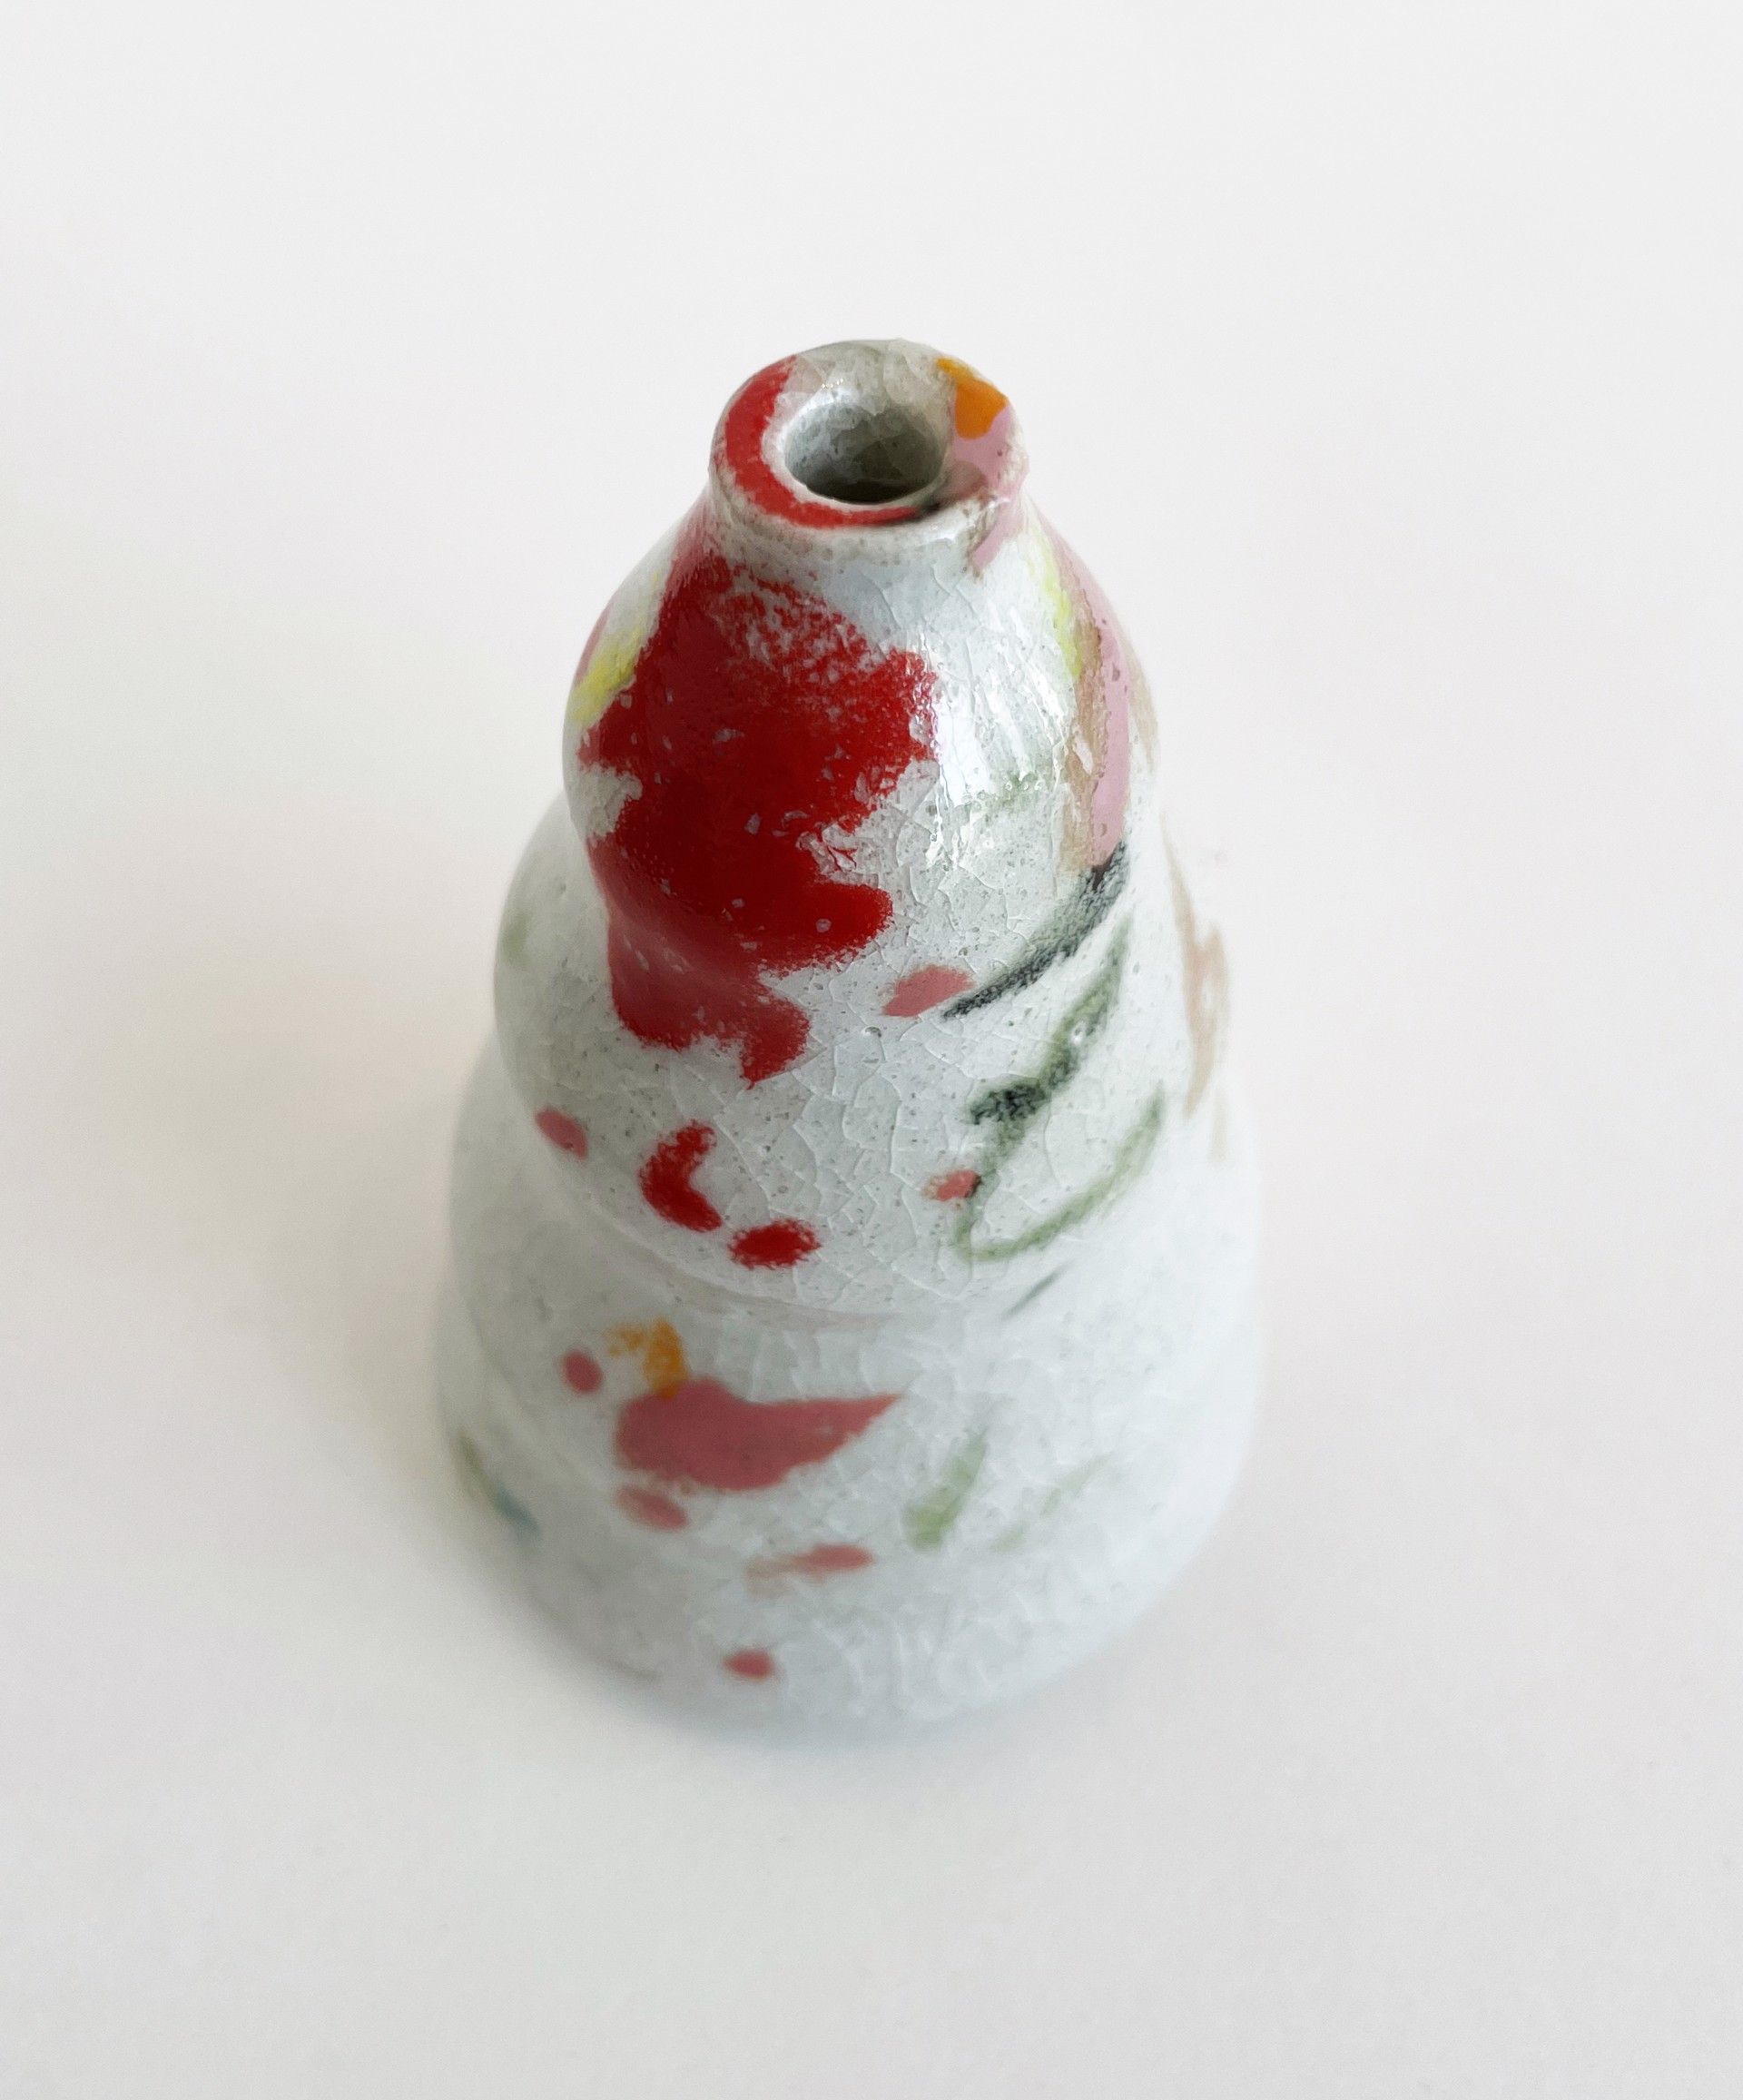 Red and White Crackle Weed Pot by Bean Finneran